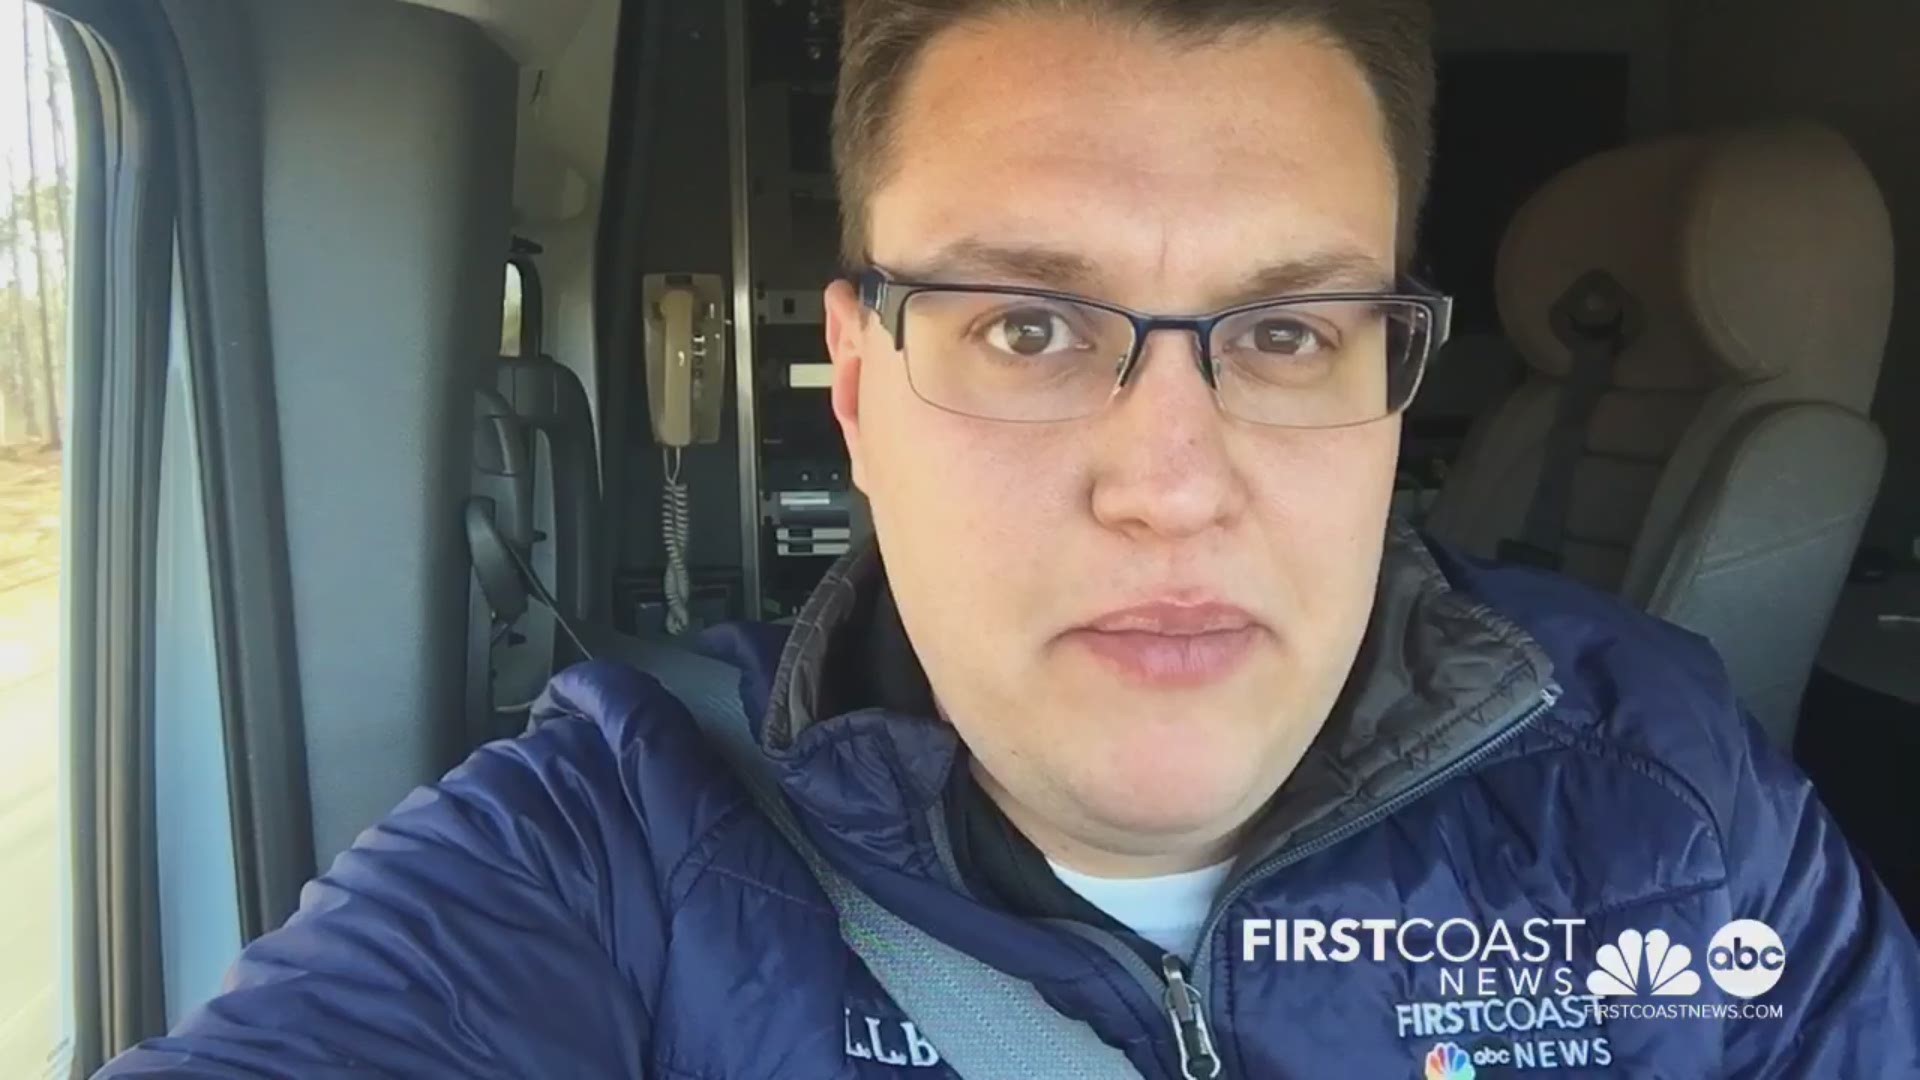 First Coast News is heading to Mobile, Alabama after a police officer from Jacksonville was killed during a shooting on Sunday.